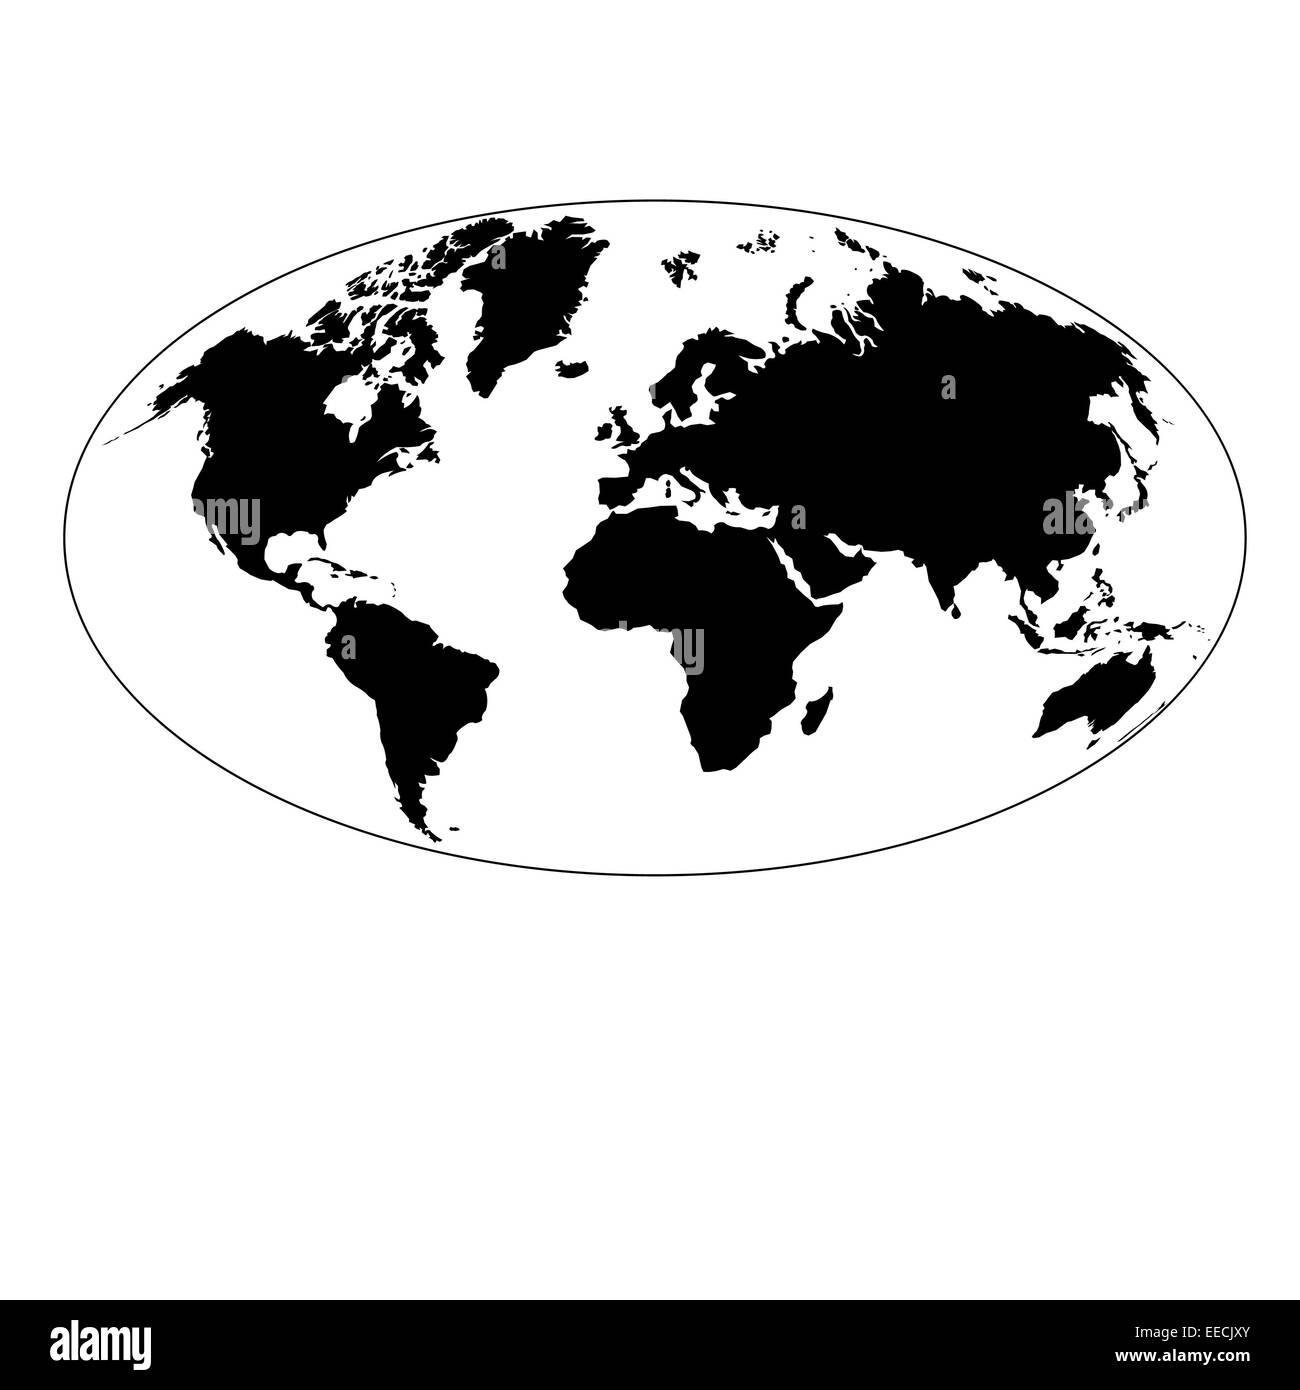 Flat earth drawing Black and White Stock Photos & Images - Alamy